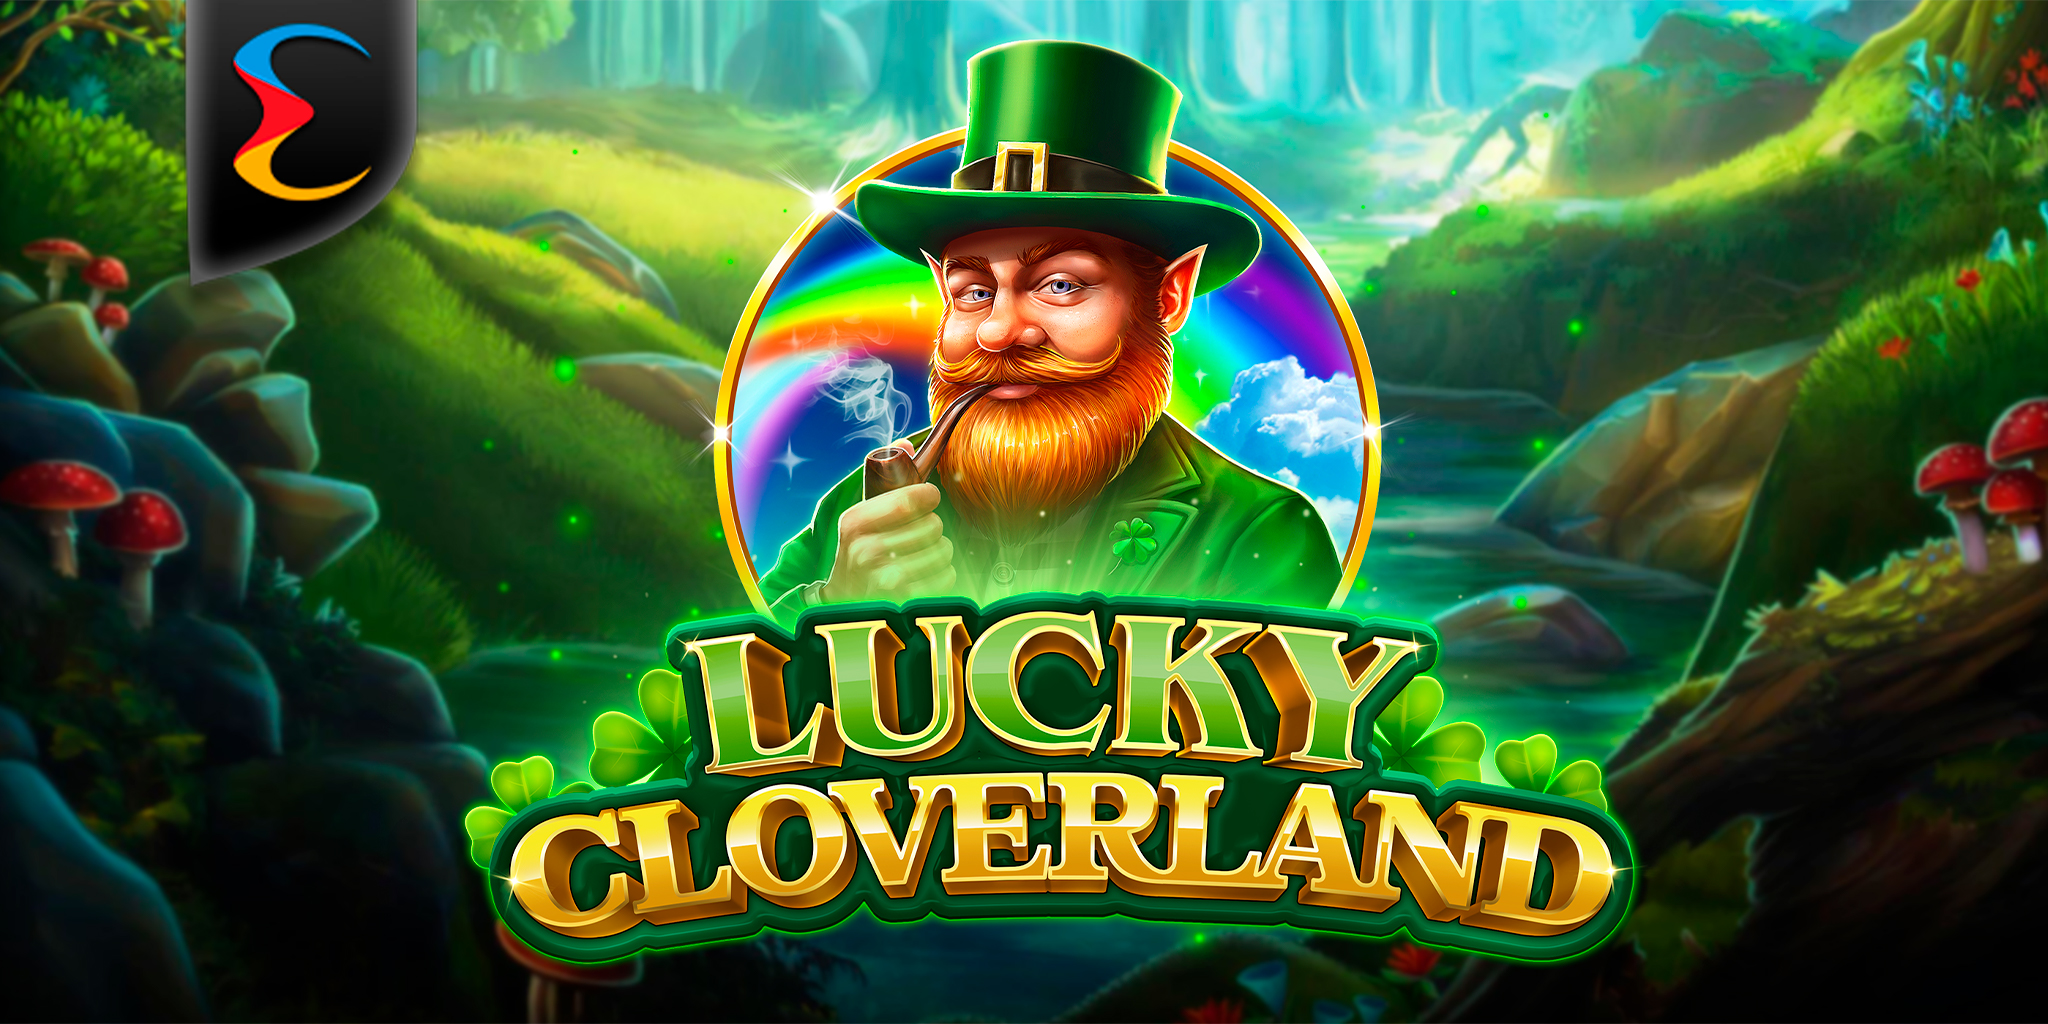 The Lucky Cloverland Online Slot Demo Game by Endorphina